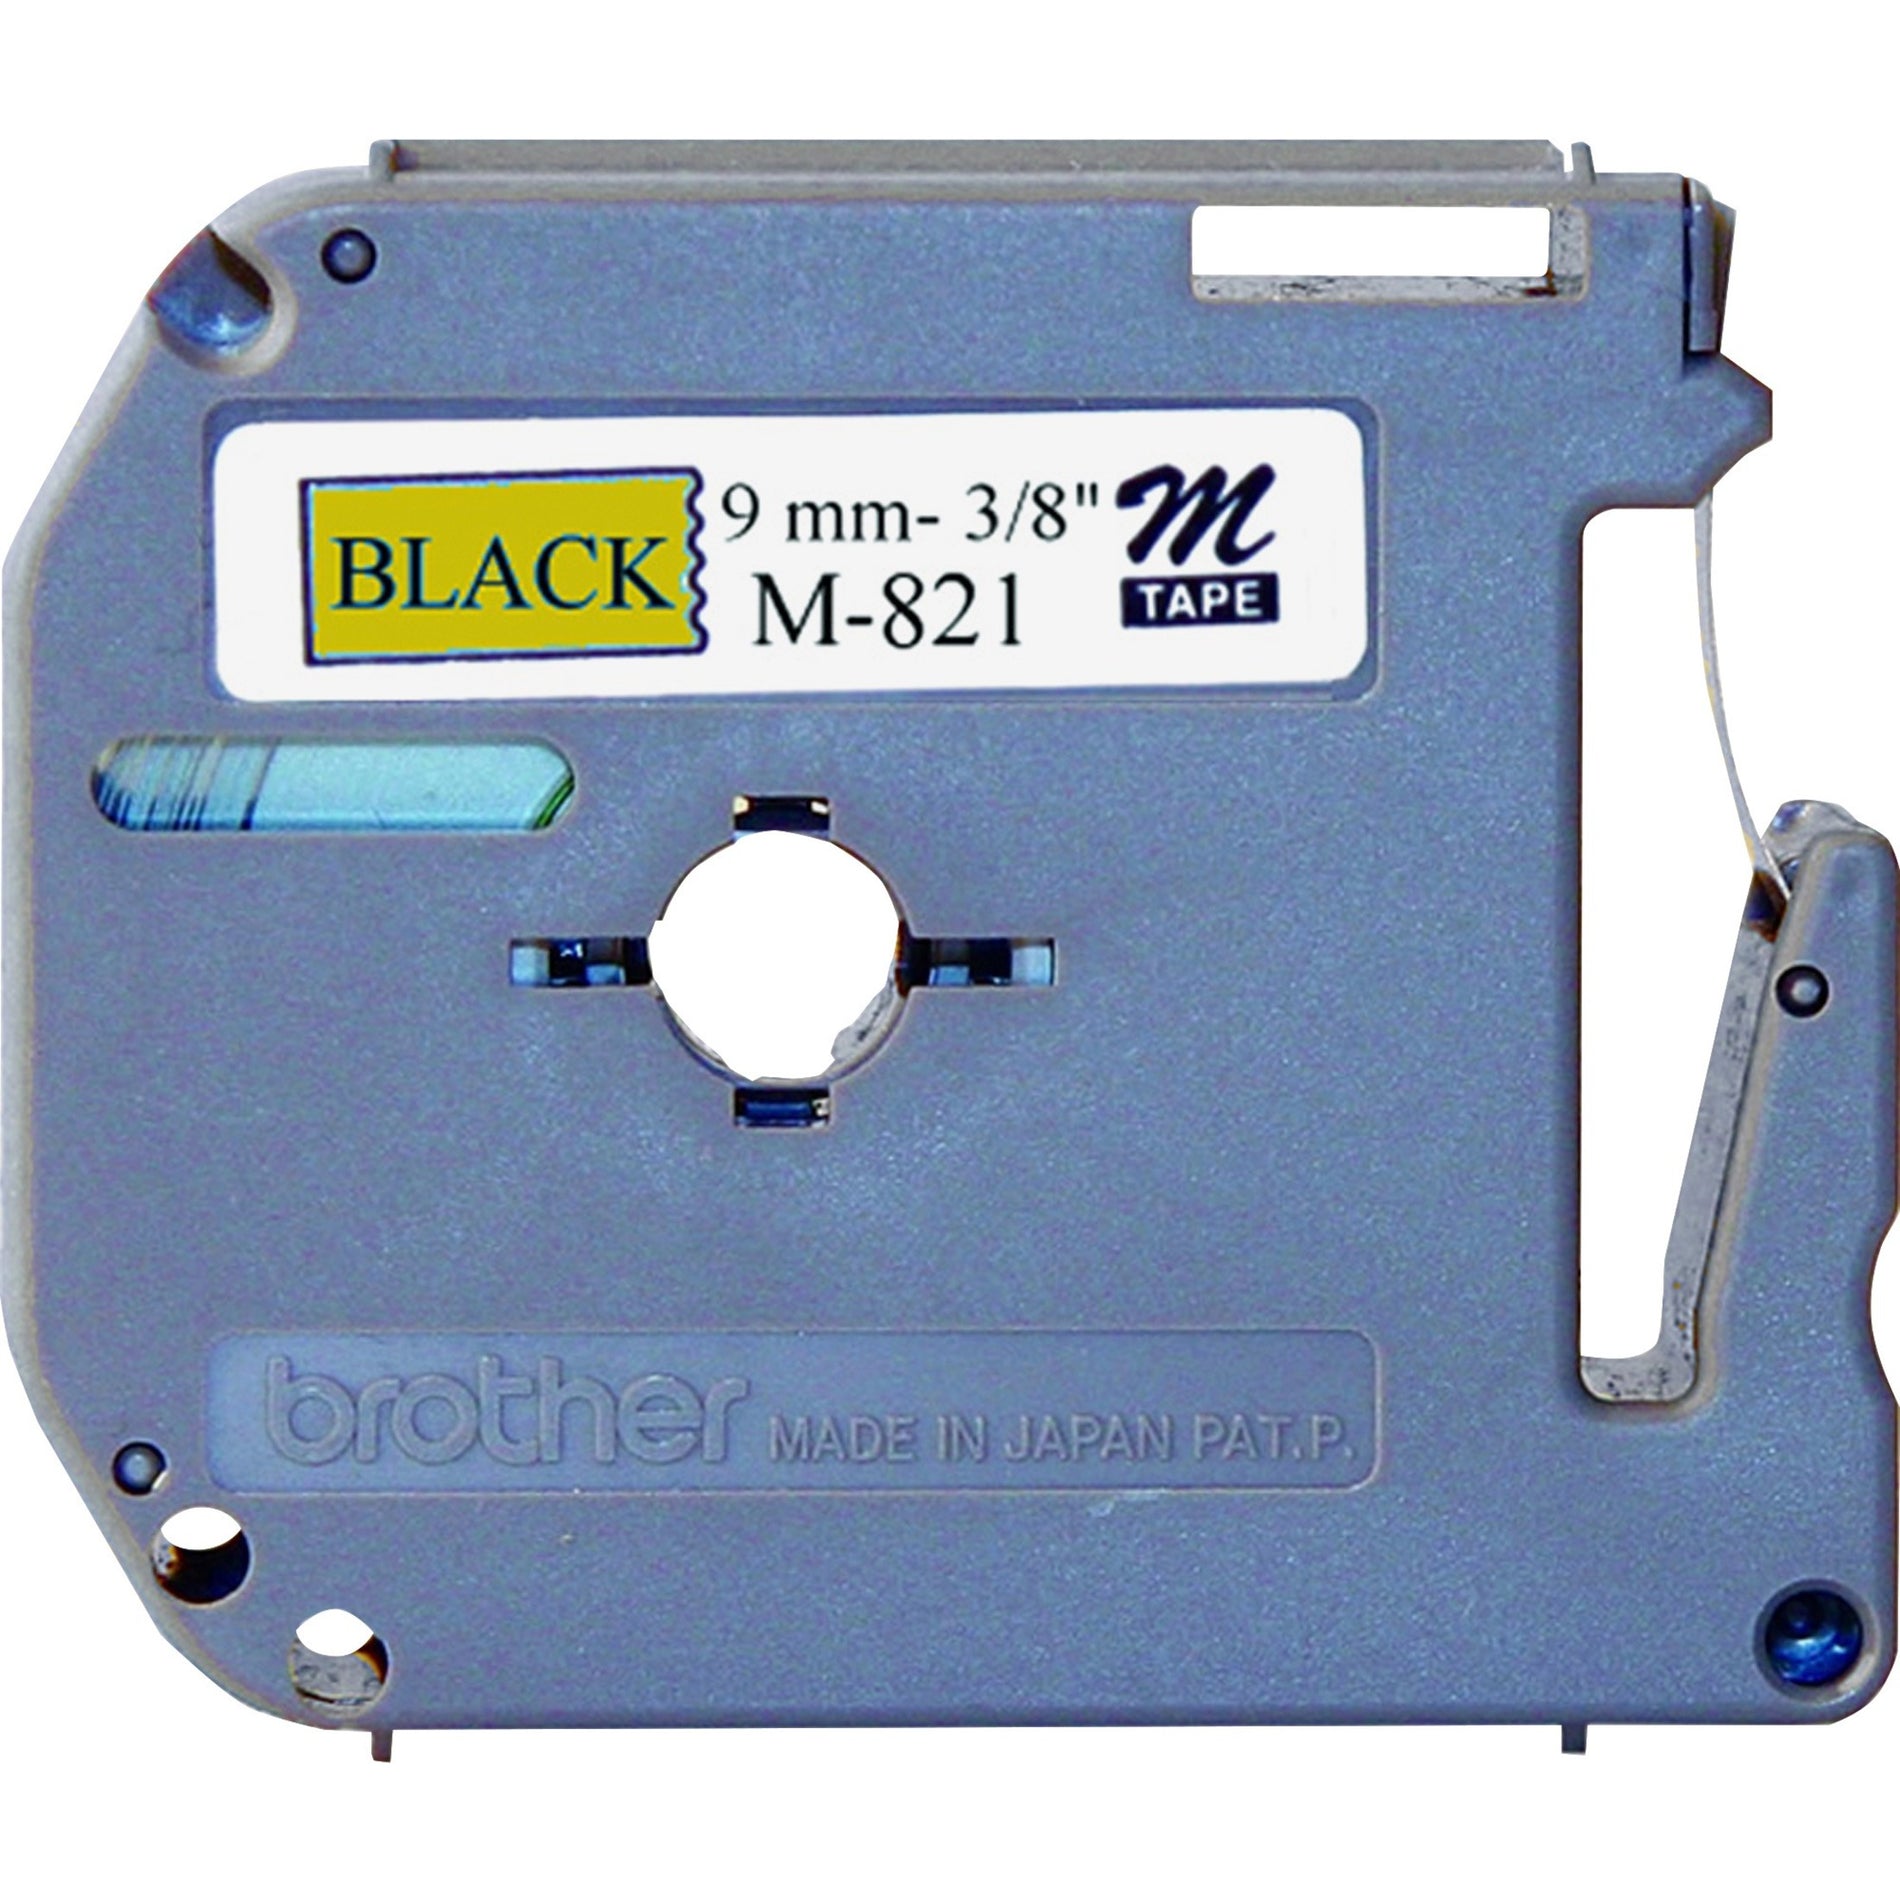 Brother M821 P-touch Nonlaminated Label Tape, 3/8" Size, Black/Gold